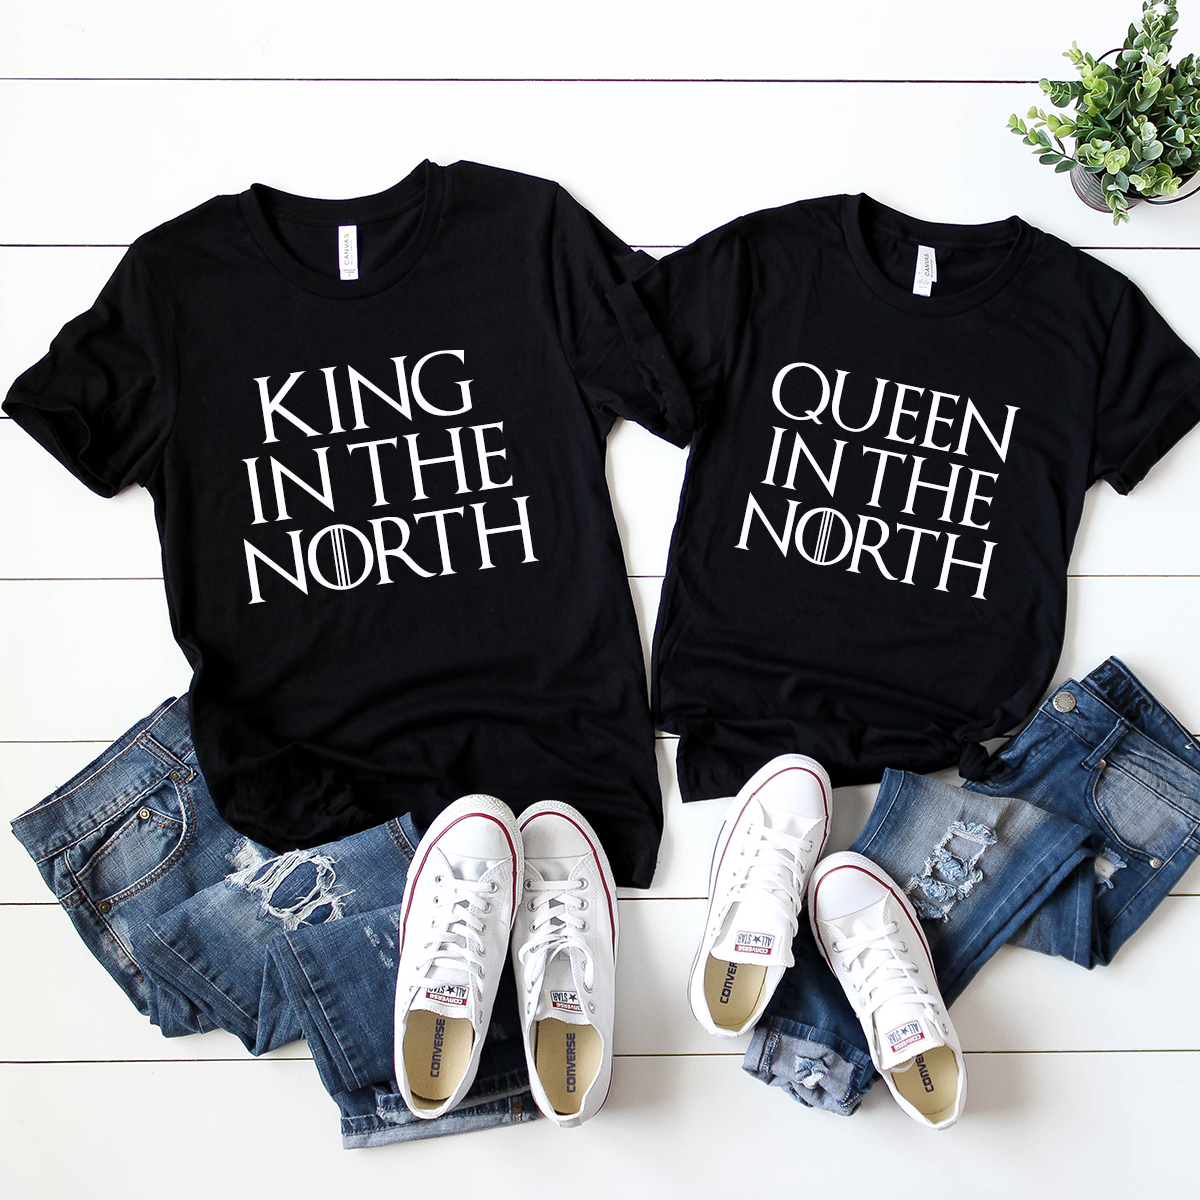 king and queen in the north shirt